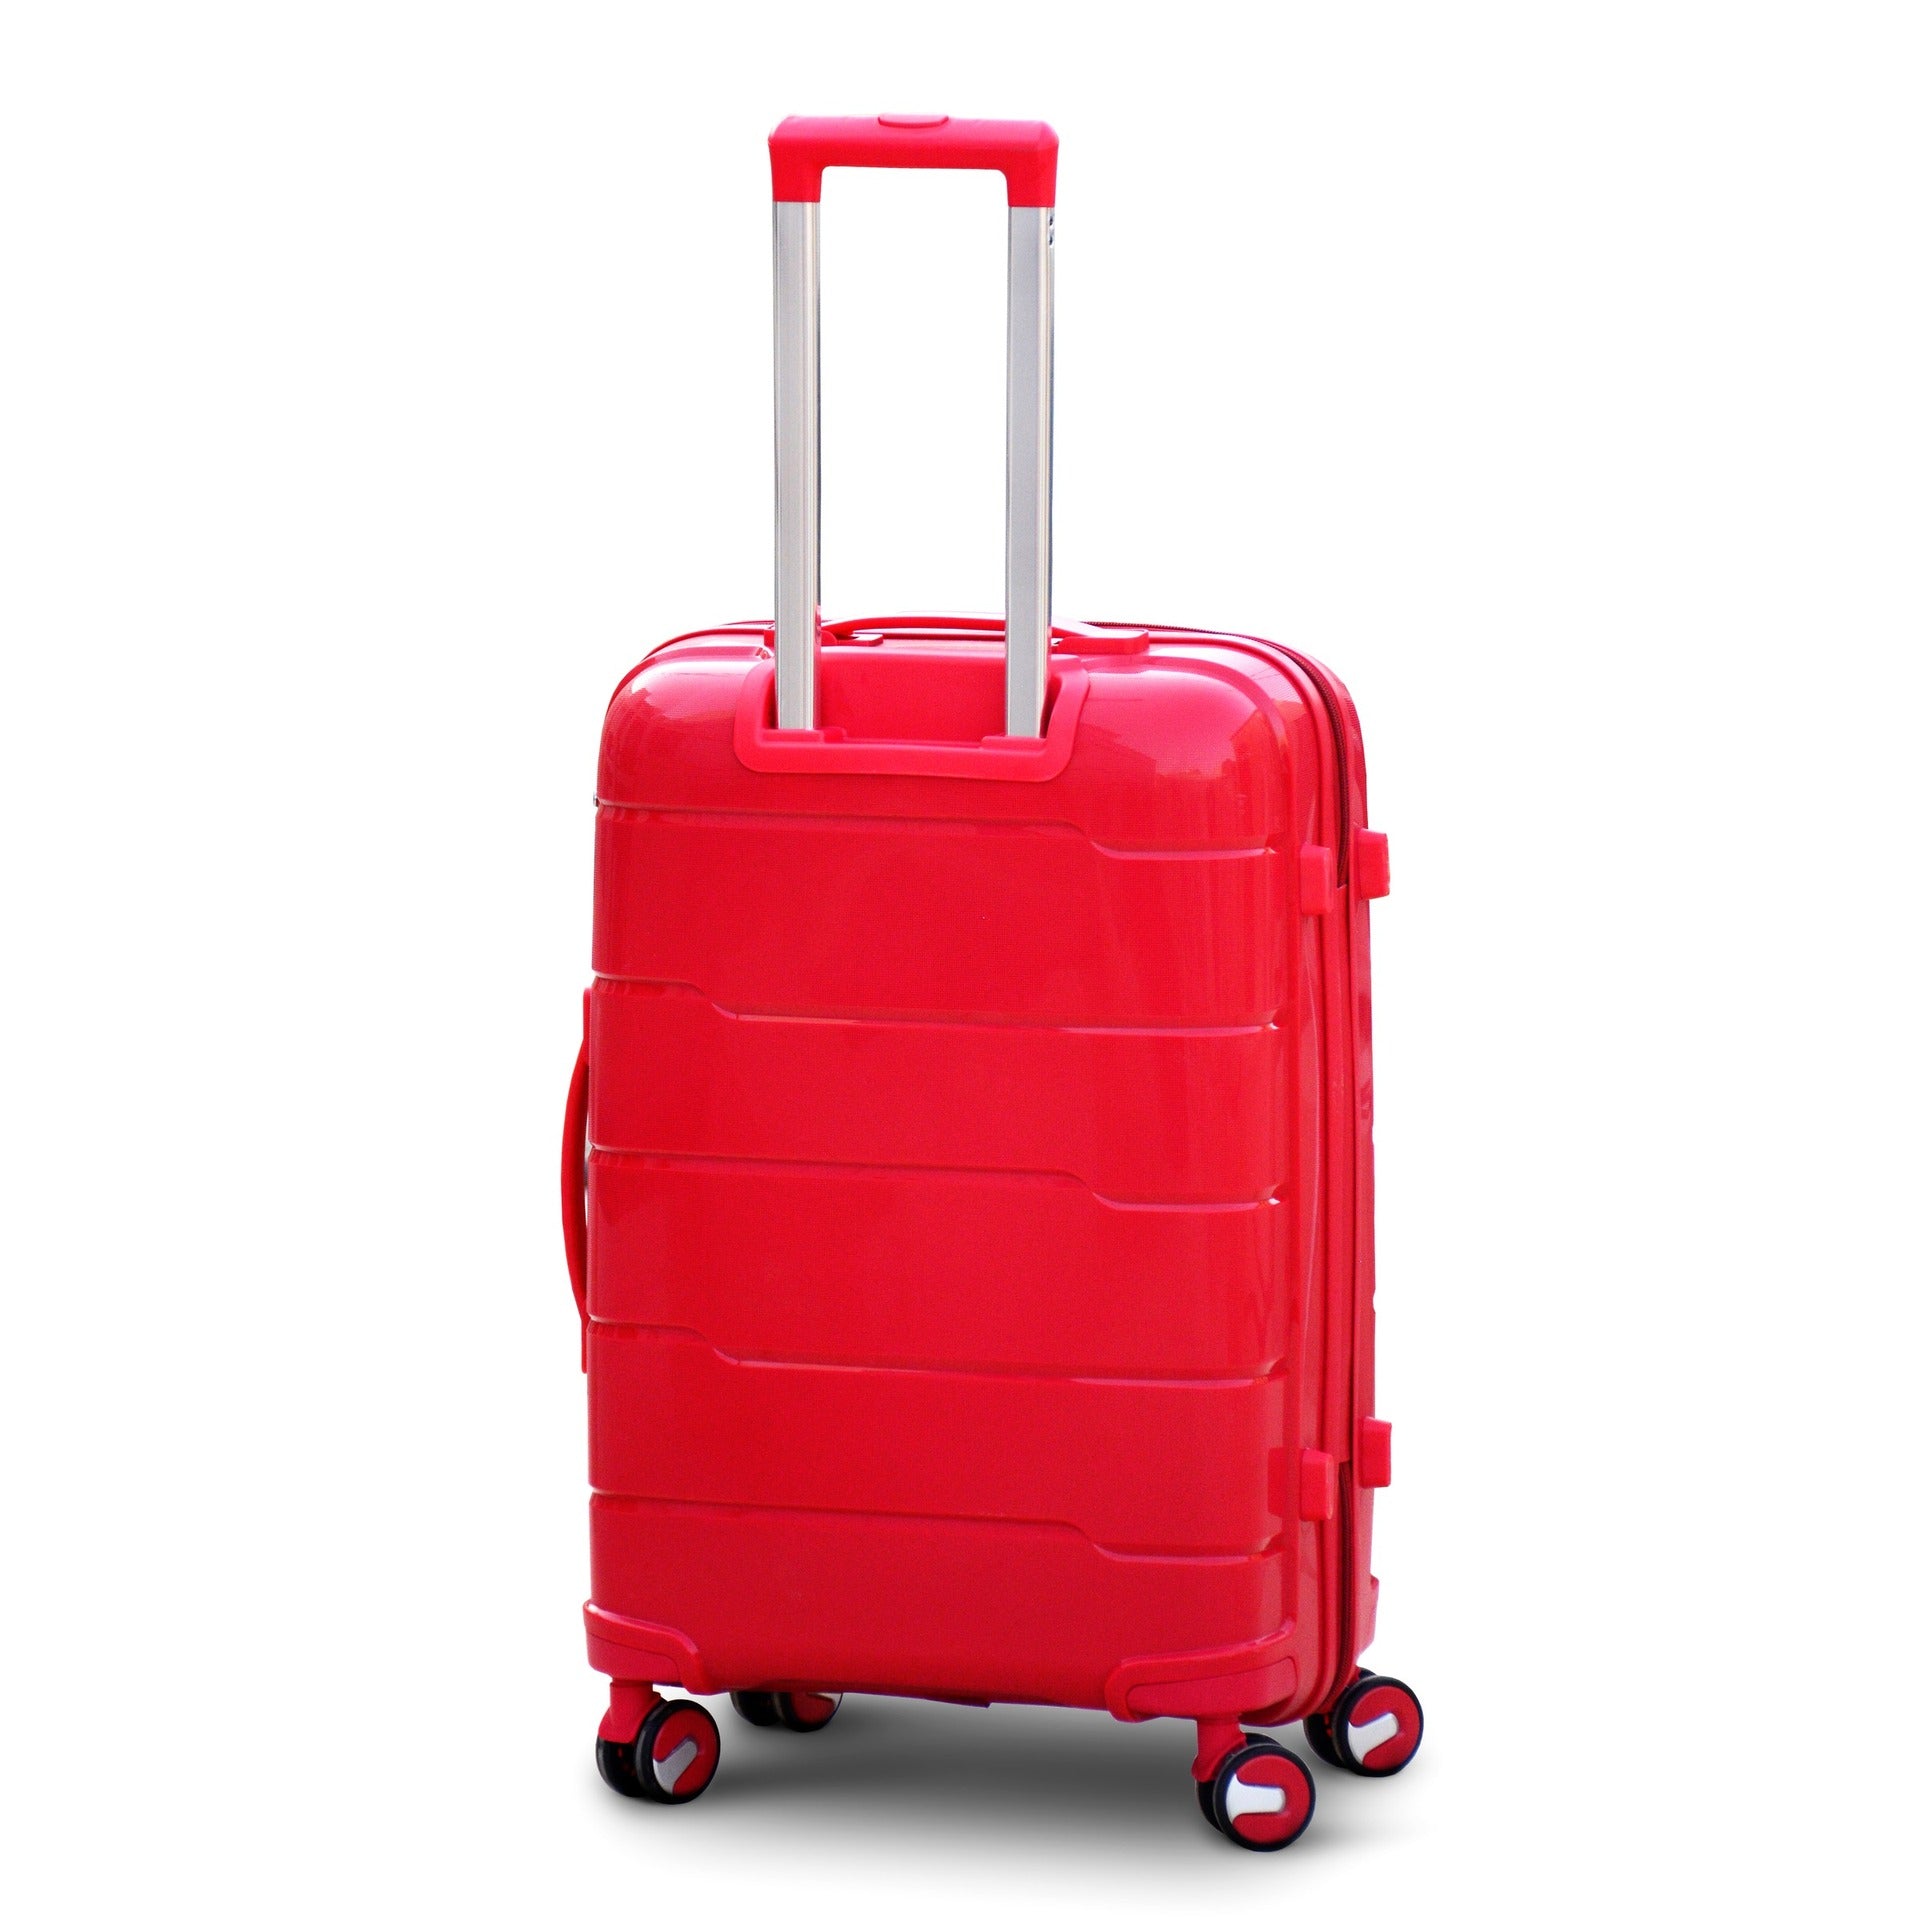 4 Piece Full Set 7" 20" 24" 28 Inches Red Colour Ceramic Smooth PP Luggage Hard Case Trolley Bag with Double Spinner Wheel Zaappy.com